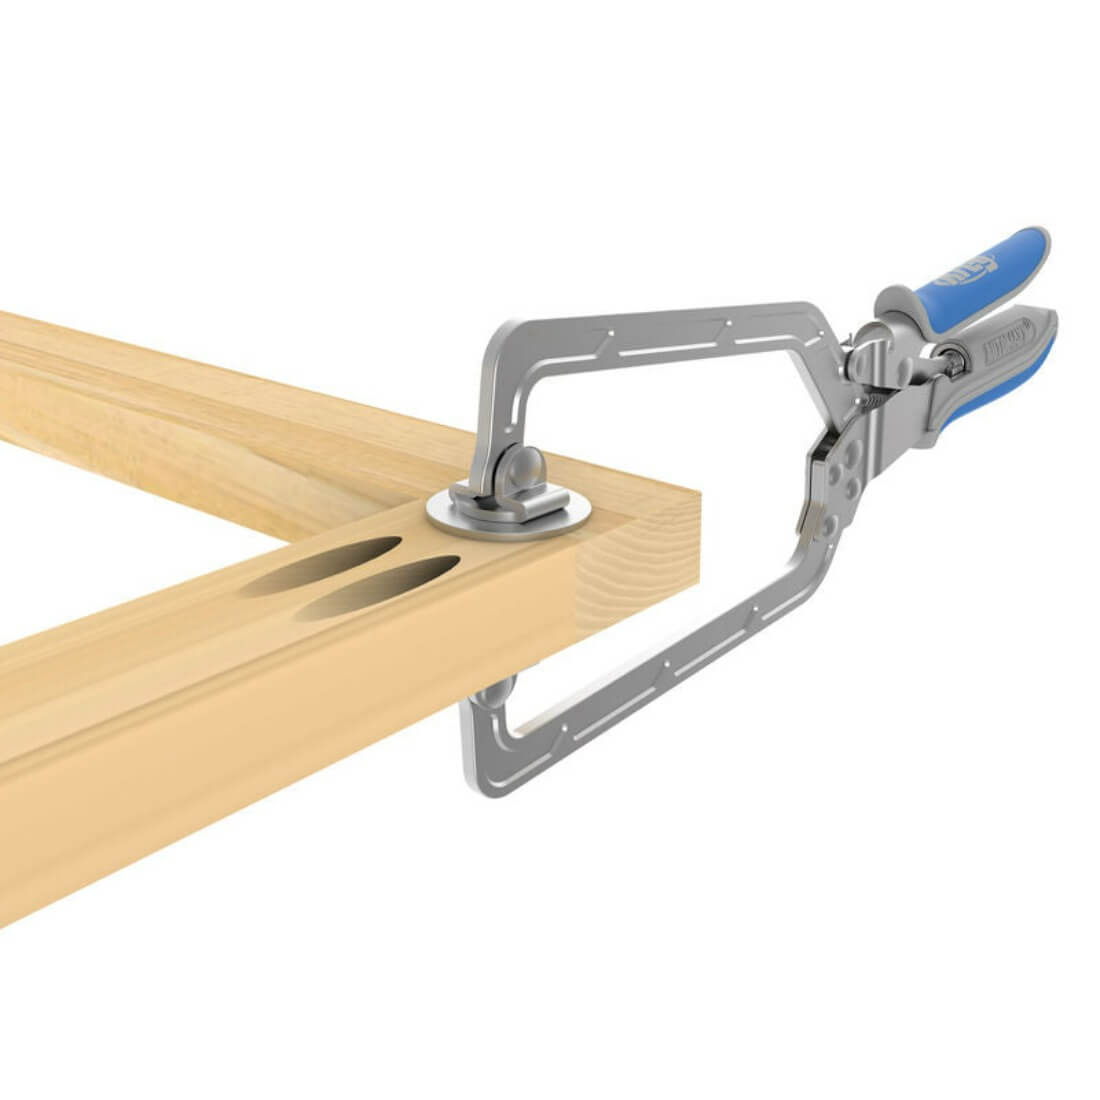 Kreg Automaxx 152mm Face Clamp shown clamp a corner of a wooden frame